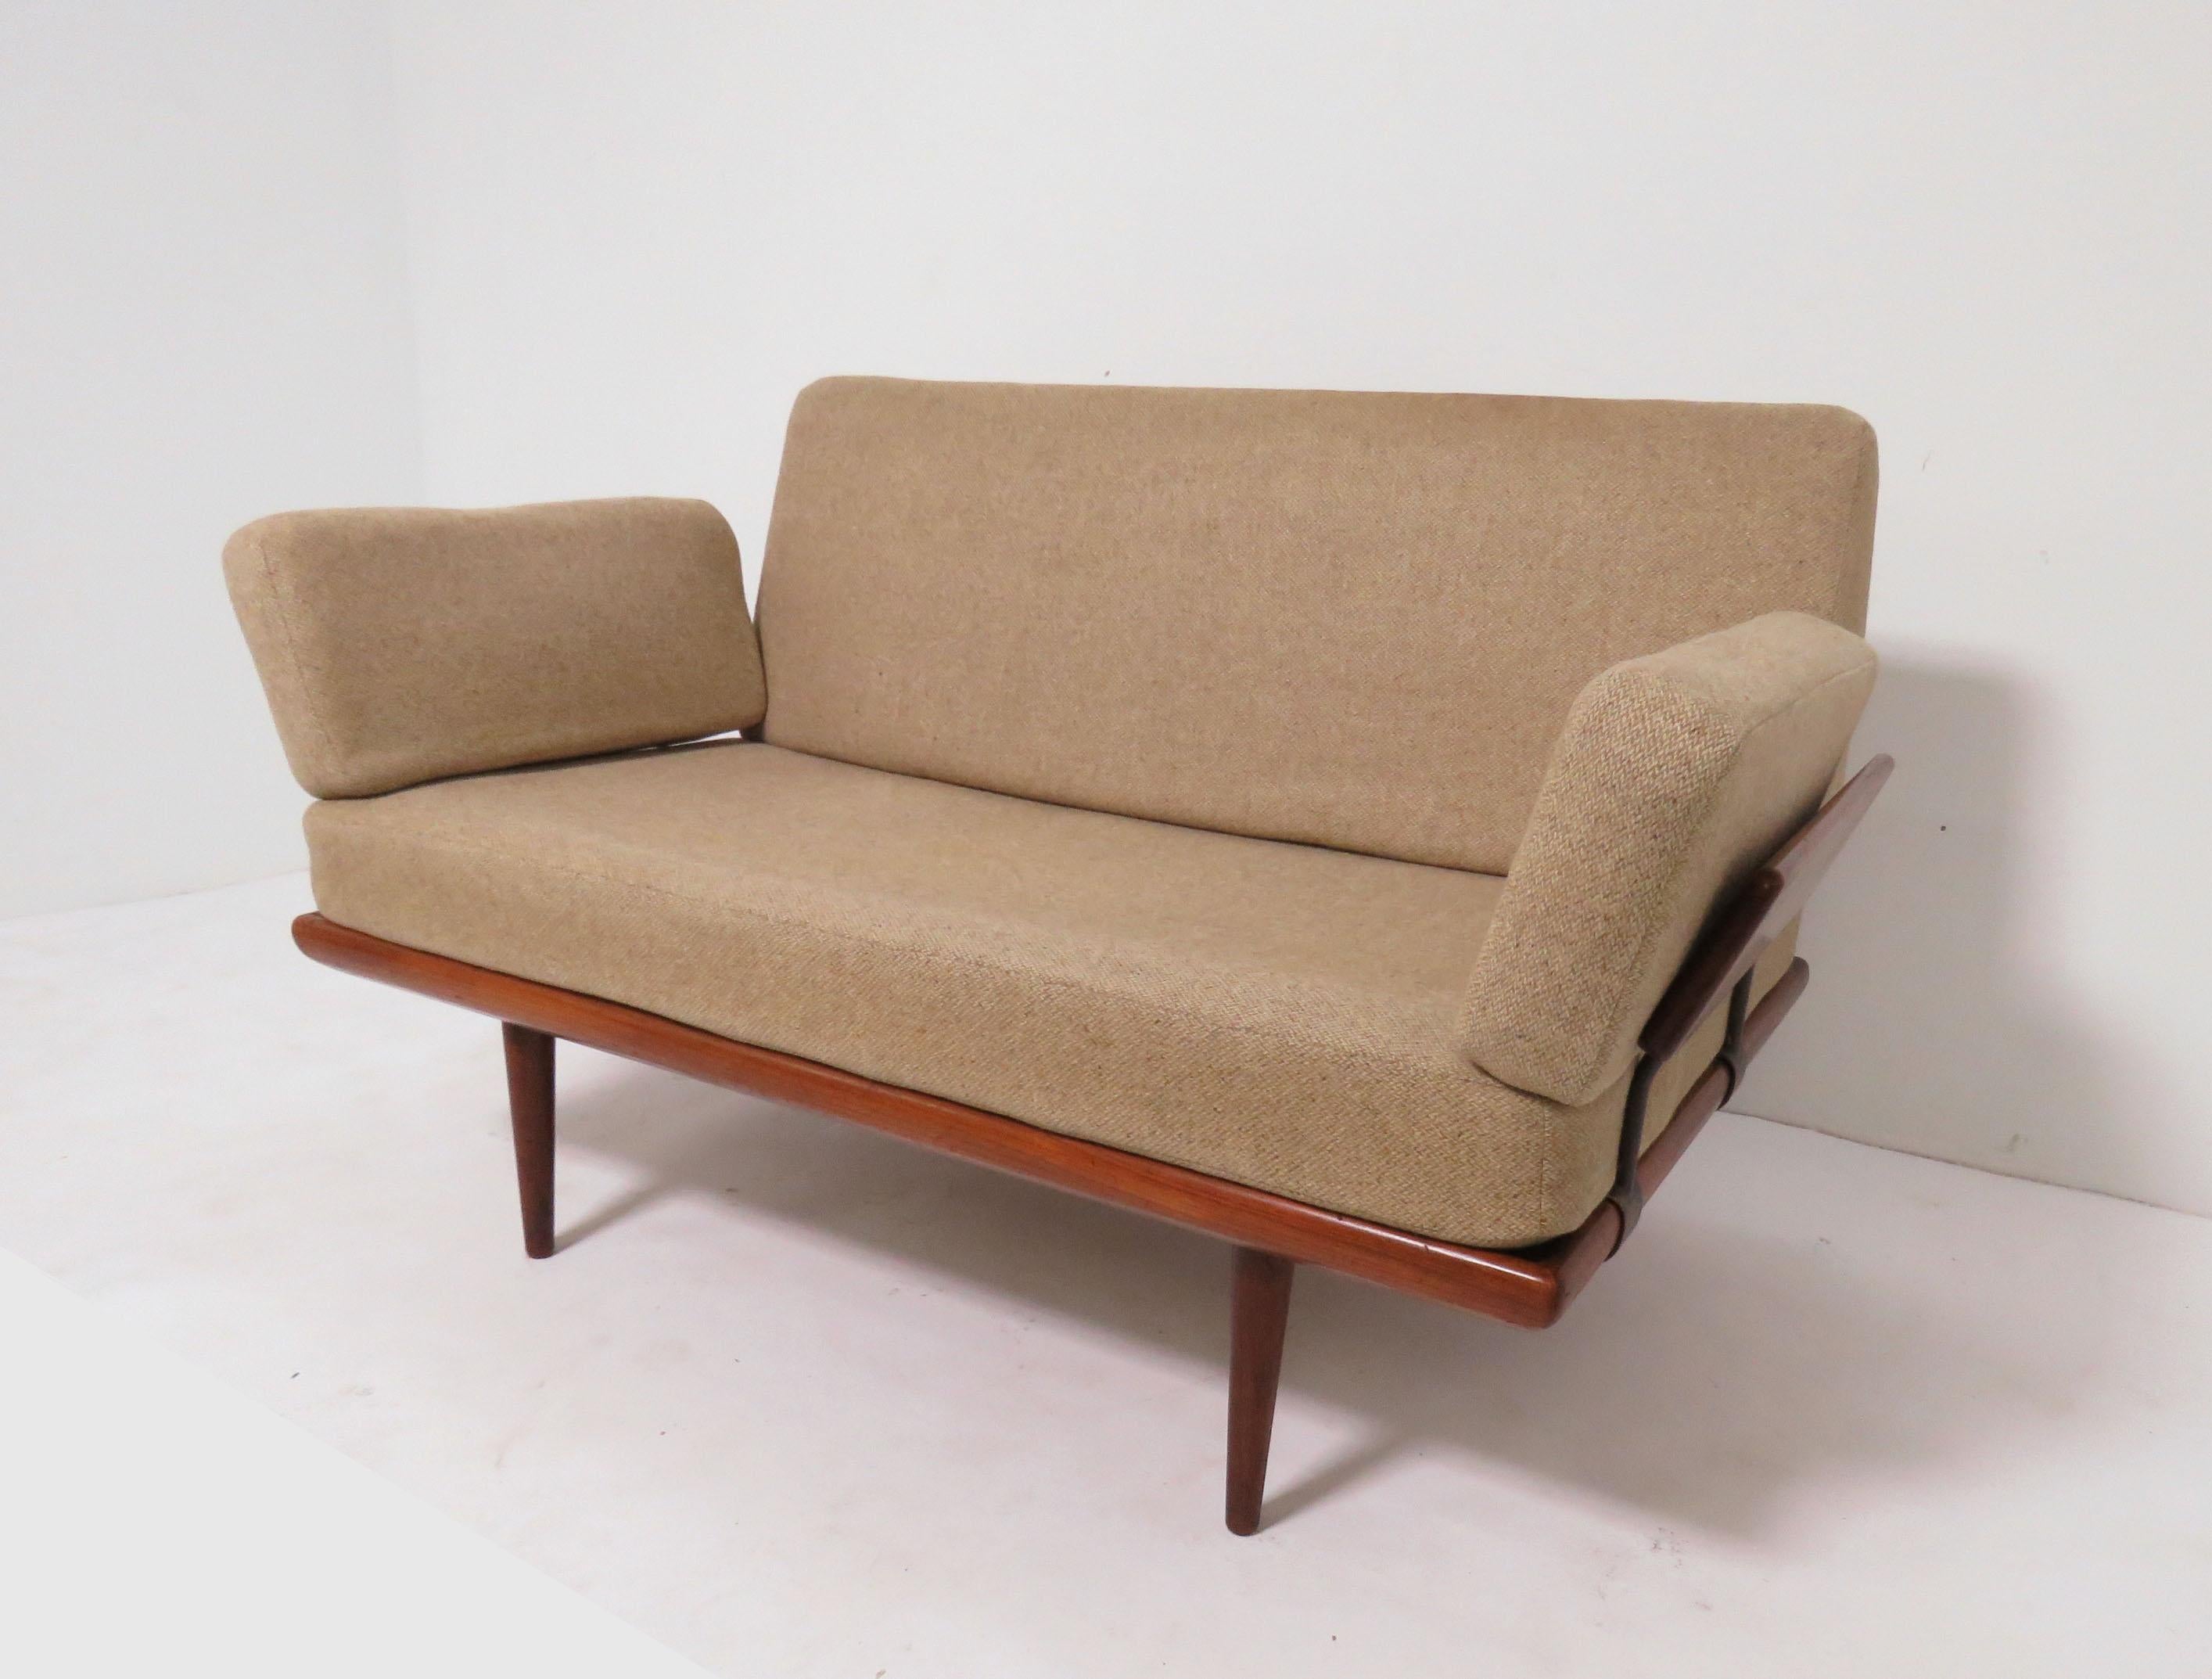 Teak Minerva two-seat loveseat sofa, designed by Peter Hvidt & Orla Molgaard-Nielsen, produced by France and Sons, Made in Denmark, circa 1960s.